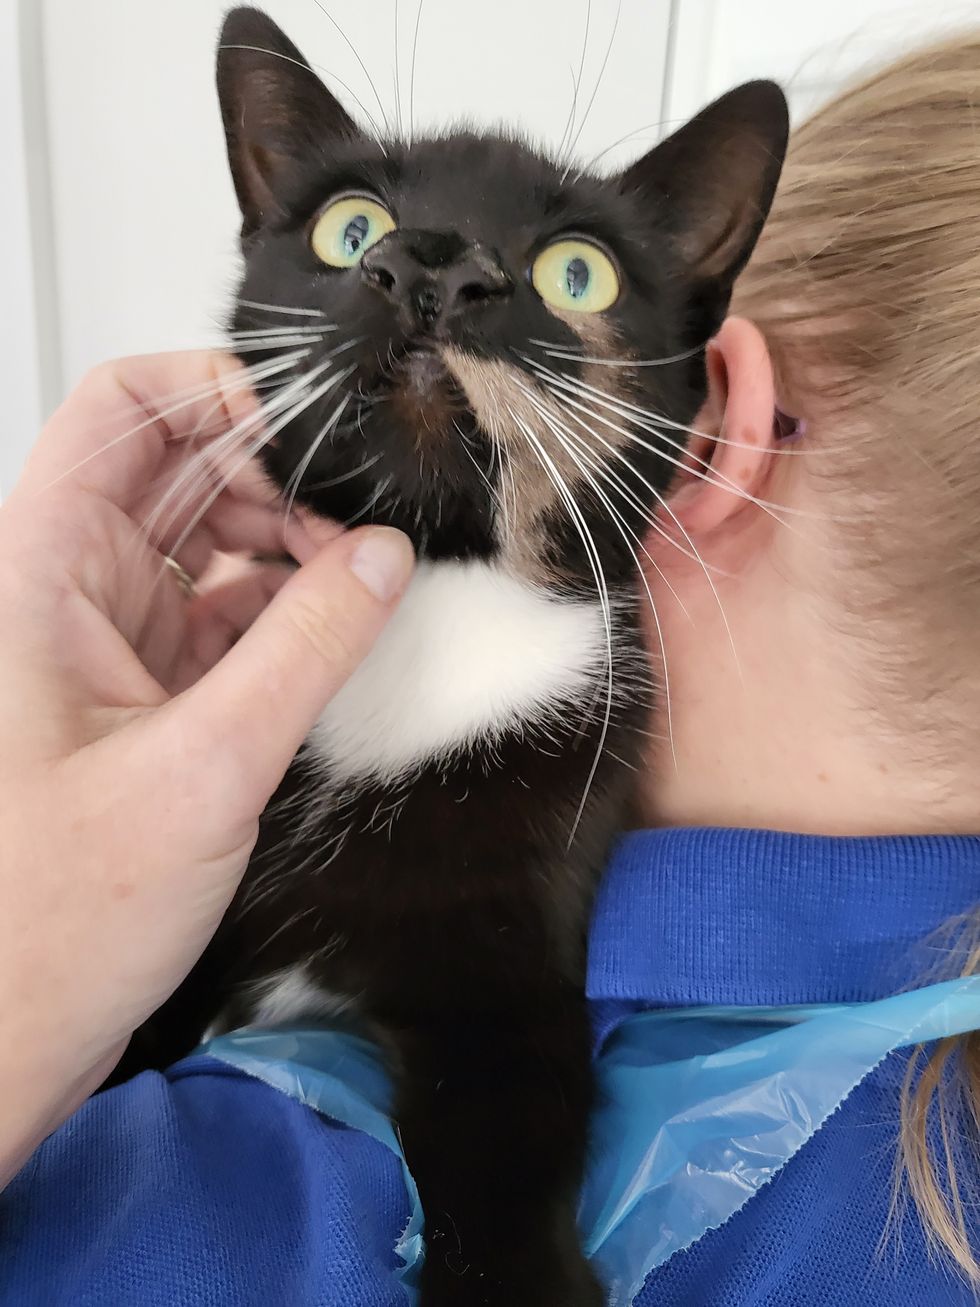 Cat with two noses deemed ‘one-of-a-kind’ by adoption centre